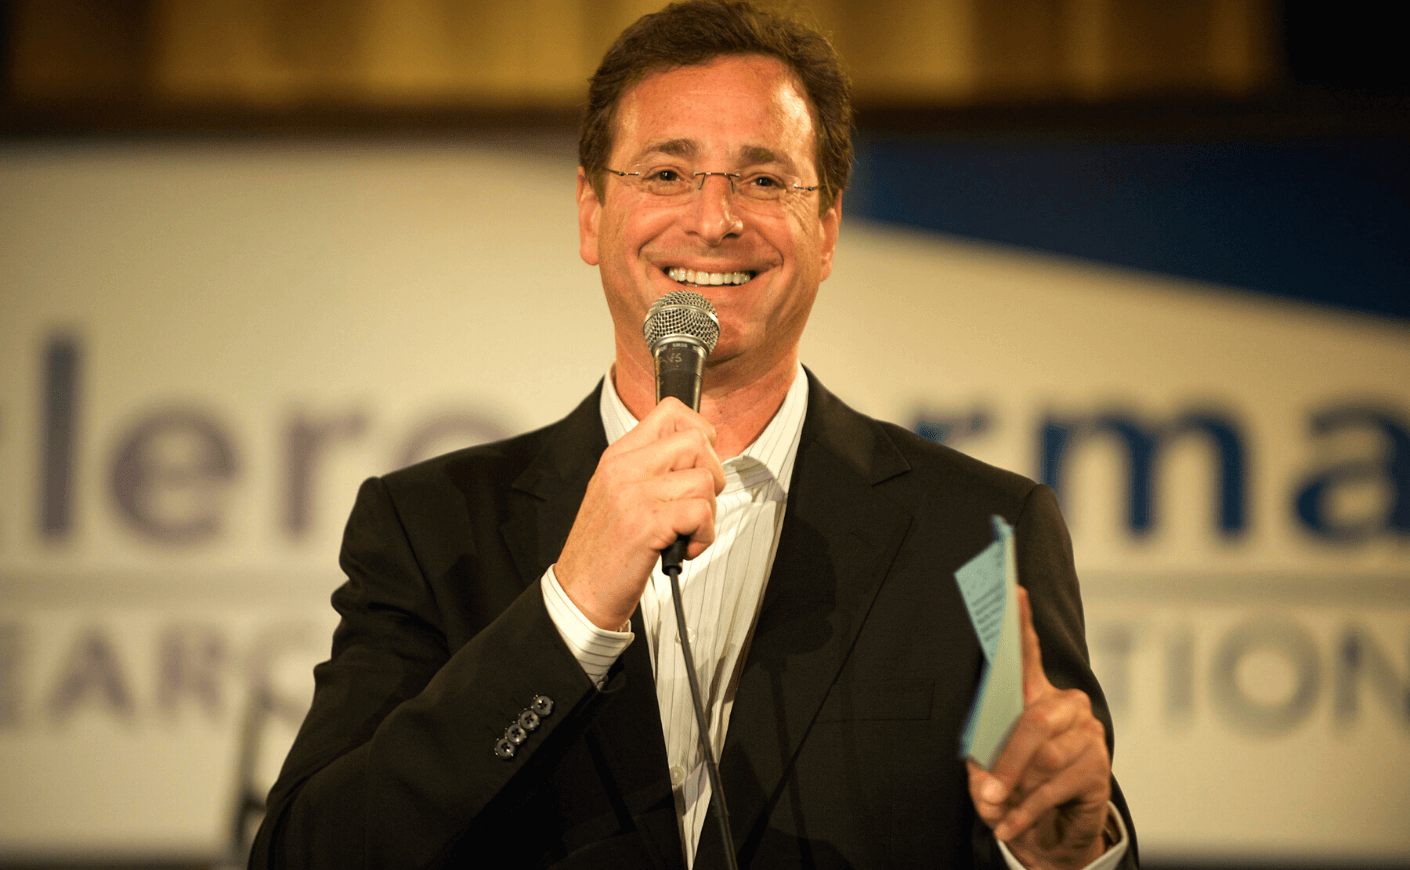 Comedian Bob Saget holding a microphone and card